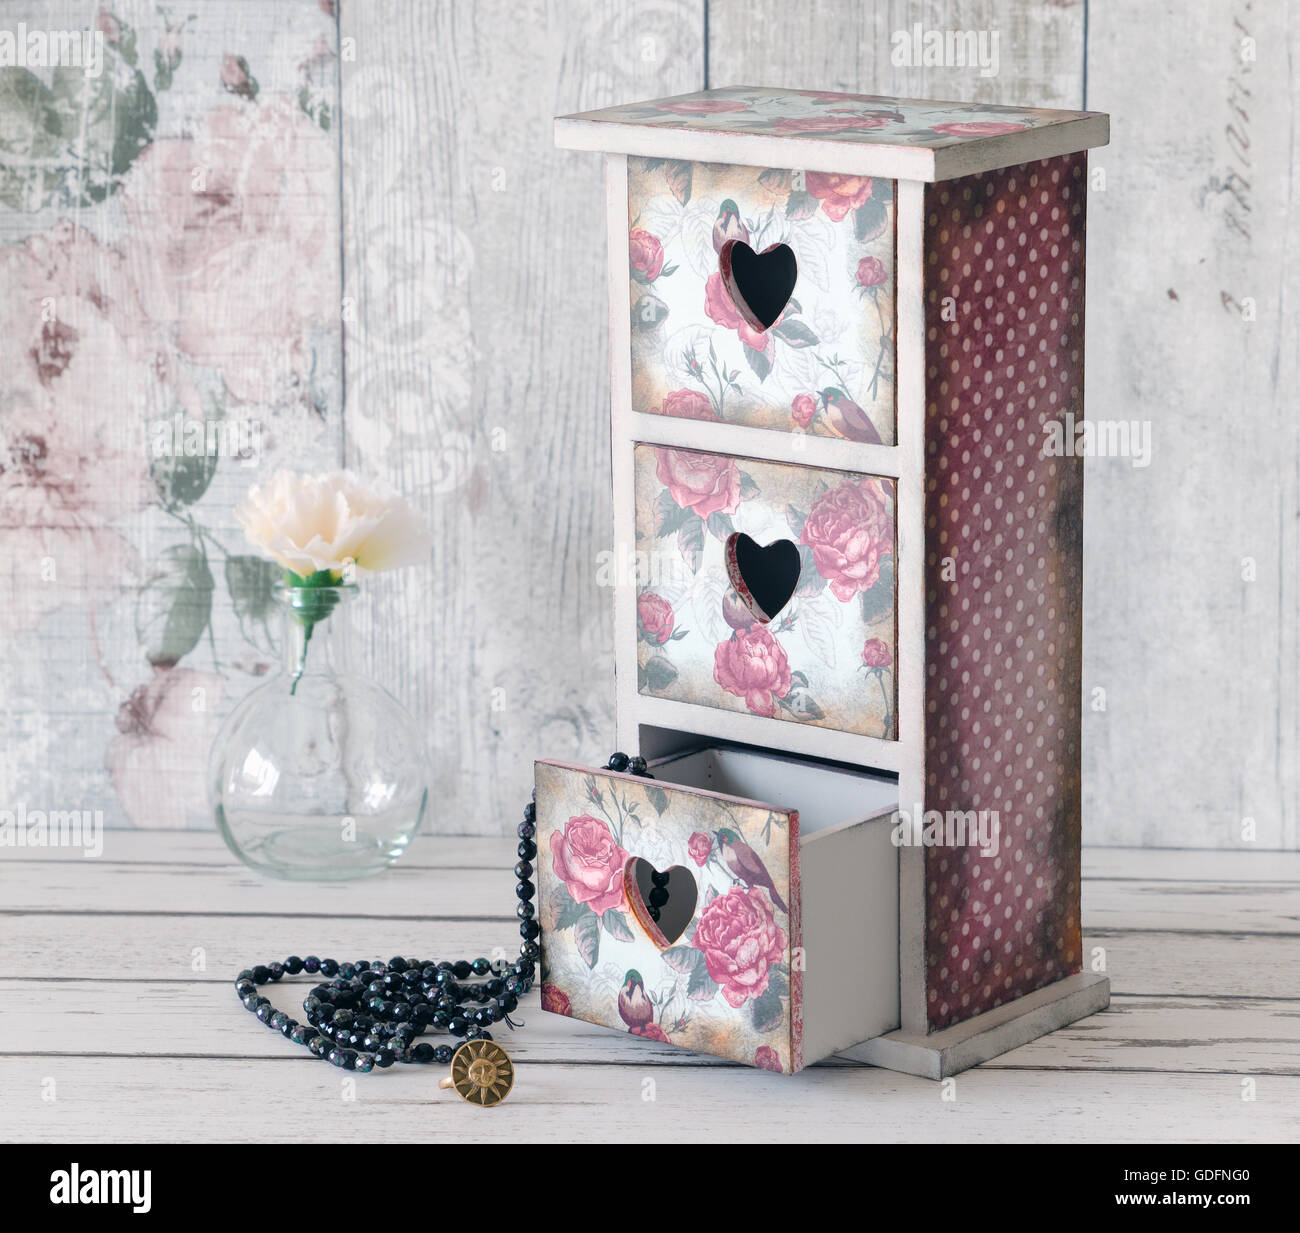 A shabby chic mini chest of drawers decoupaged in a vintage floral pattern Stock Photo